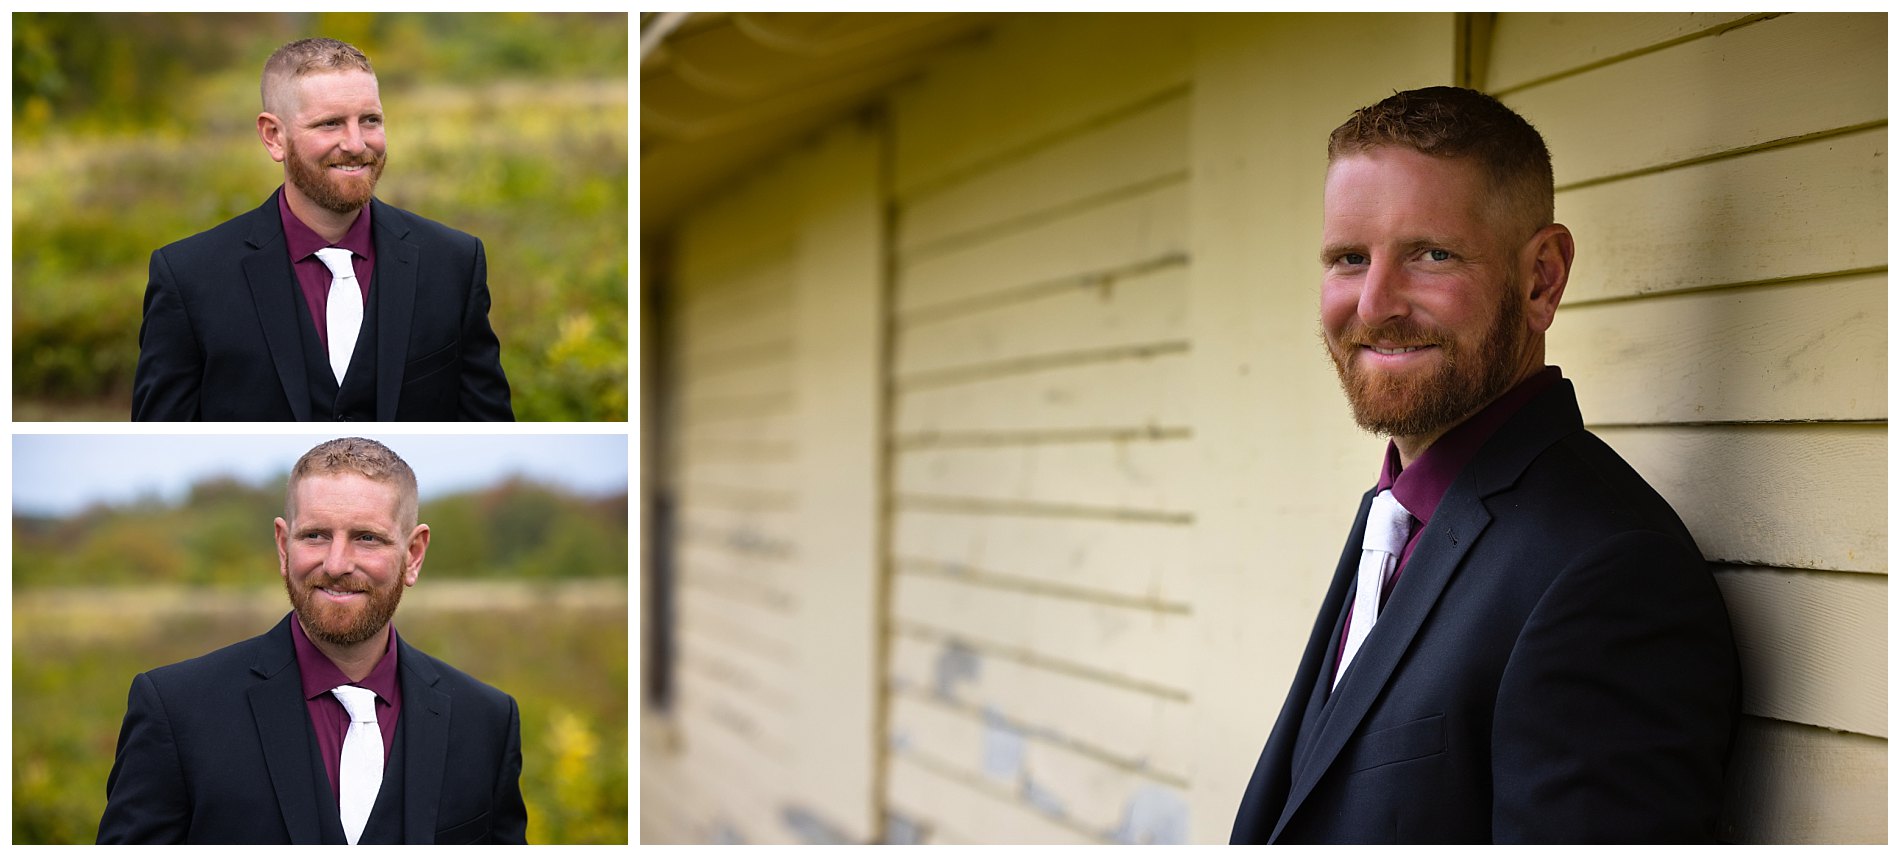 photos of the groom at laudholm farm in wells, me